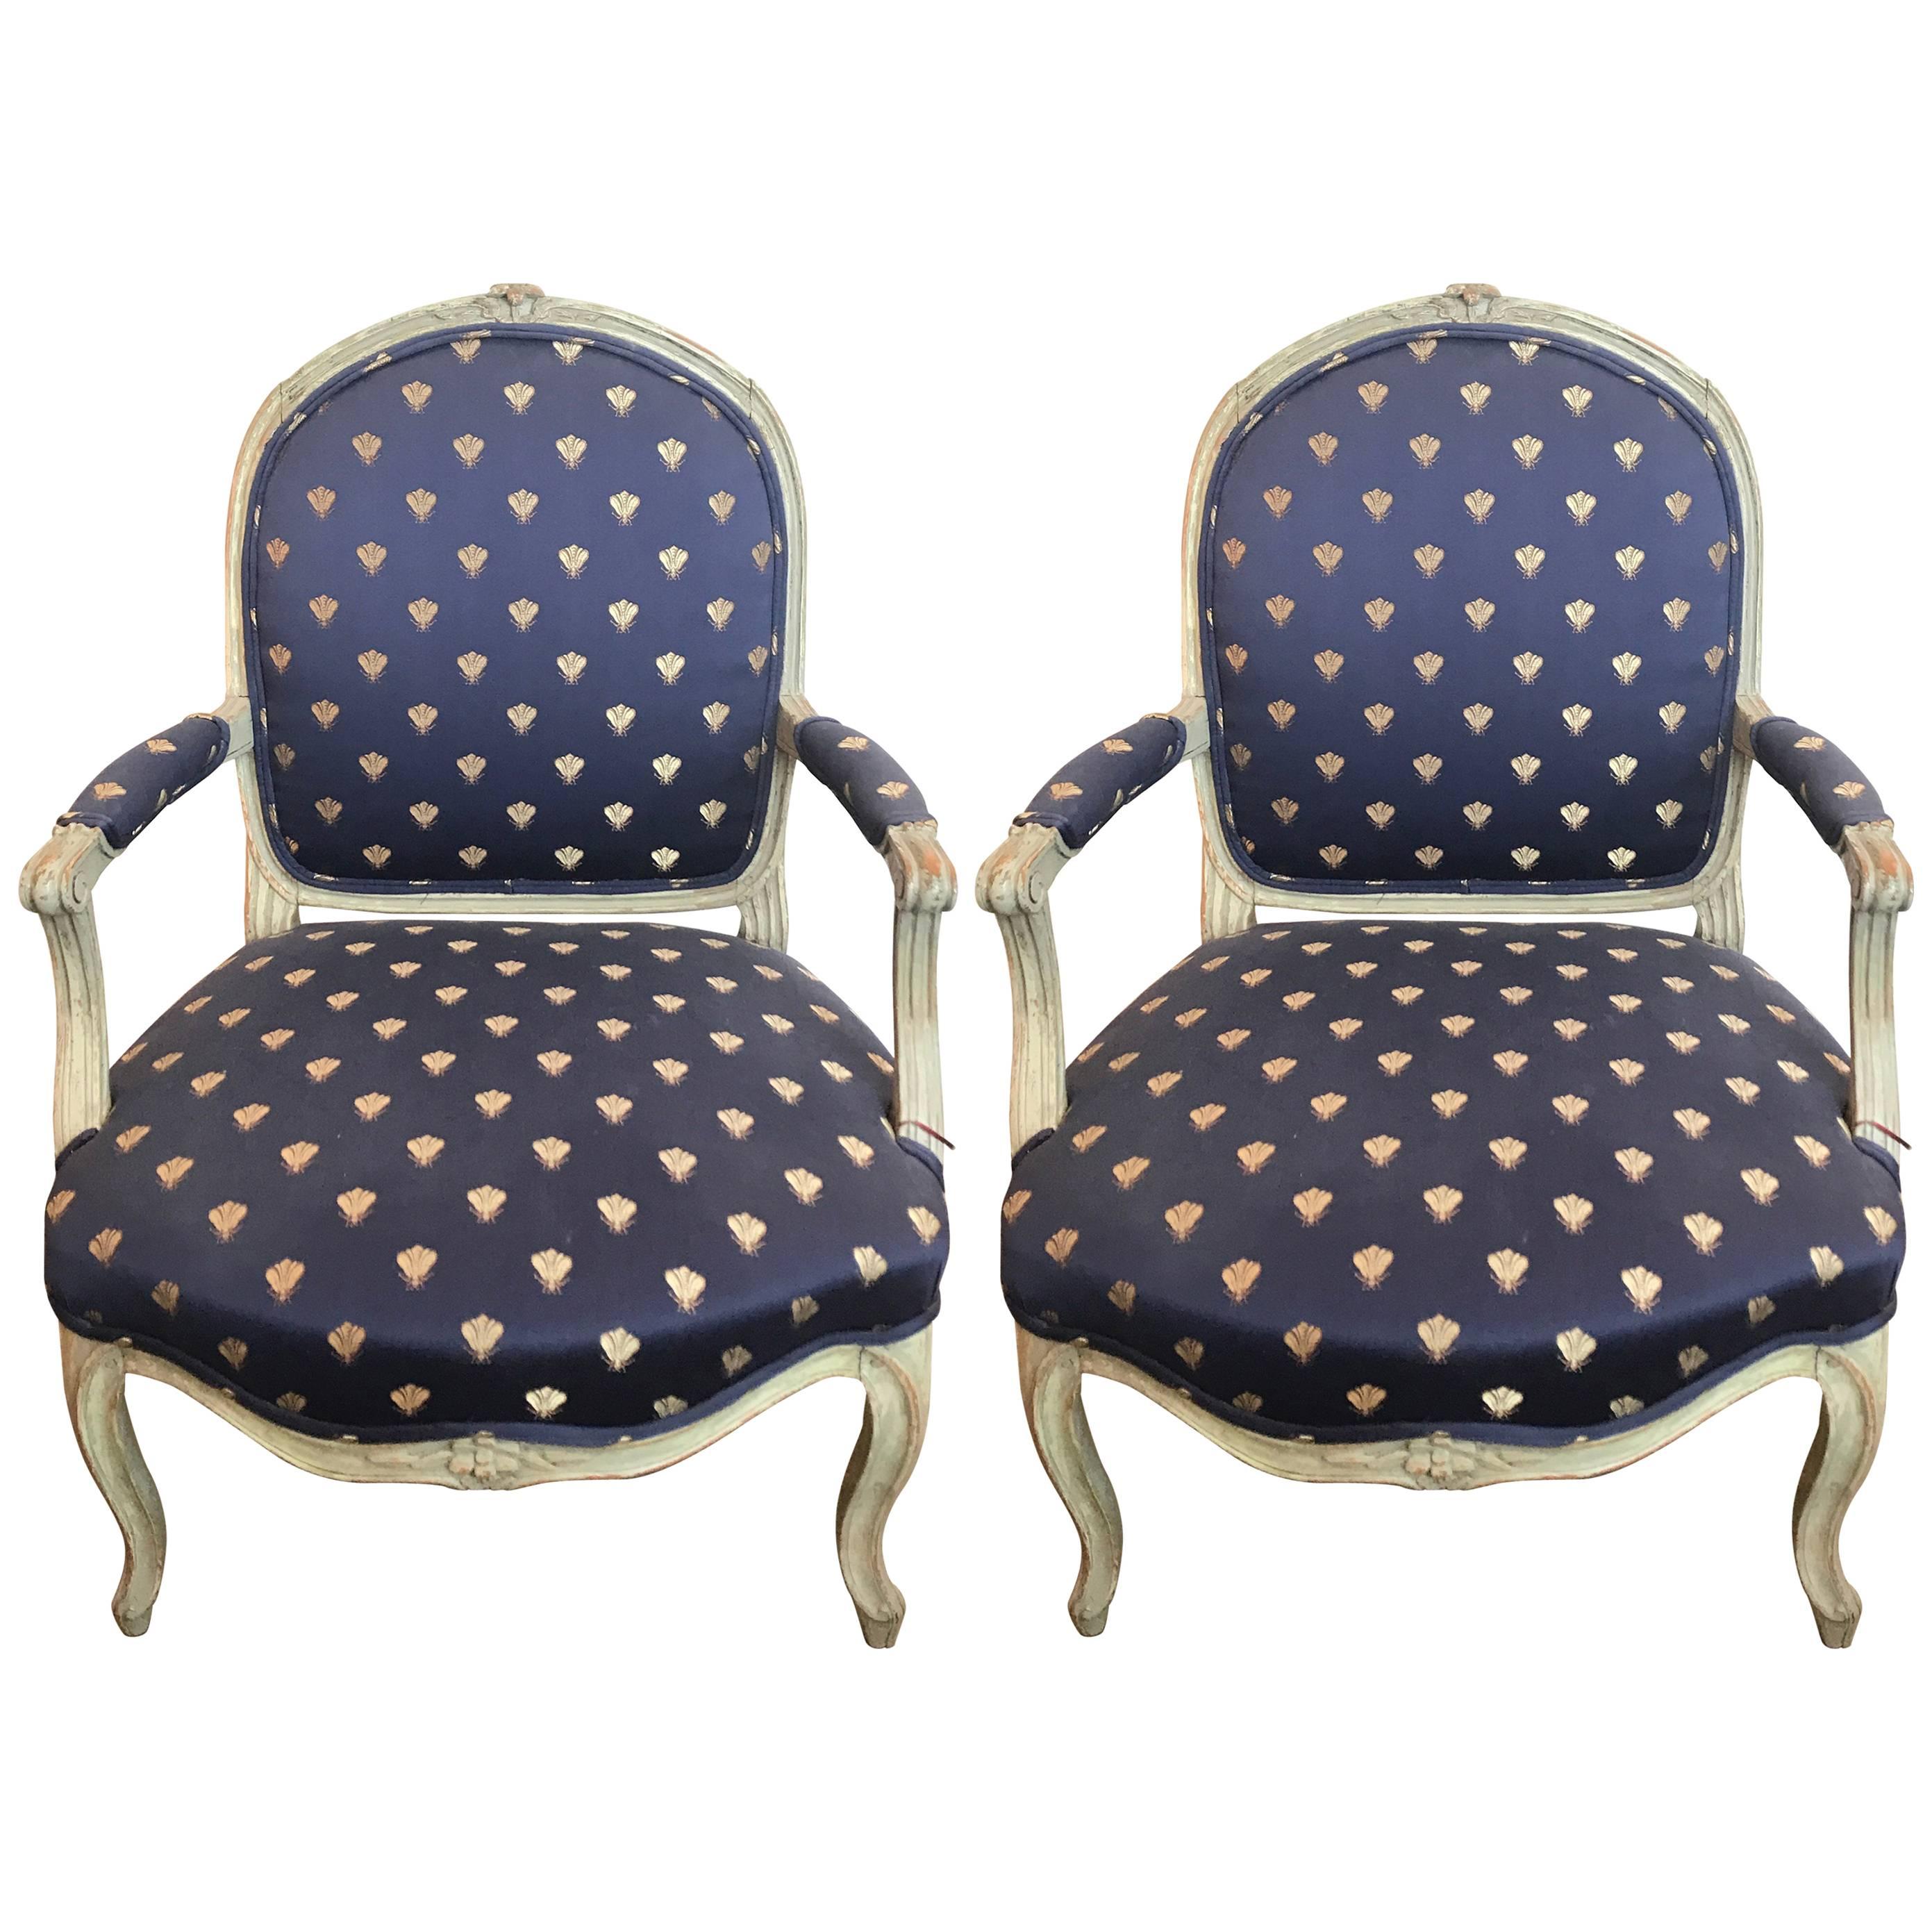 Pair of 19th Century, Louis XV Style Fauteuil Chairs